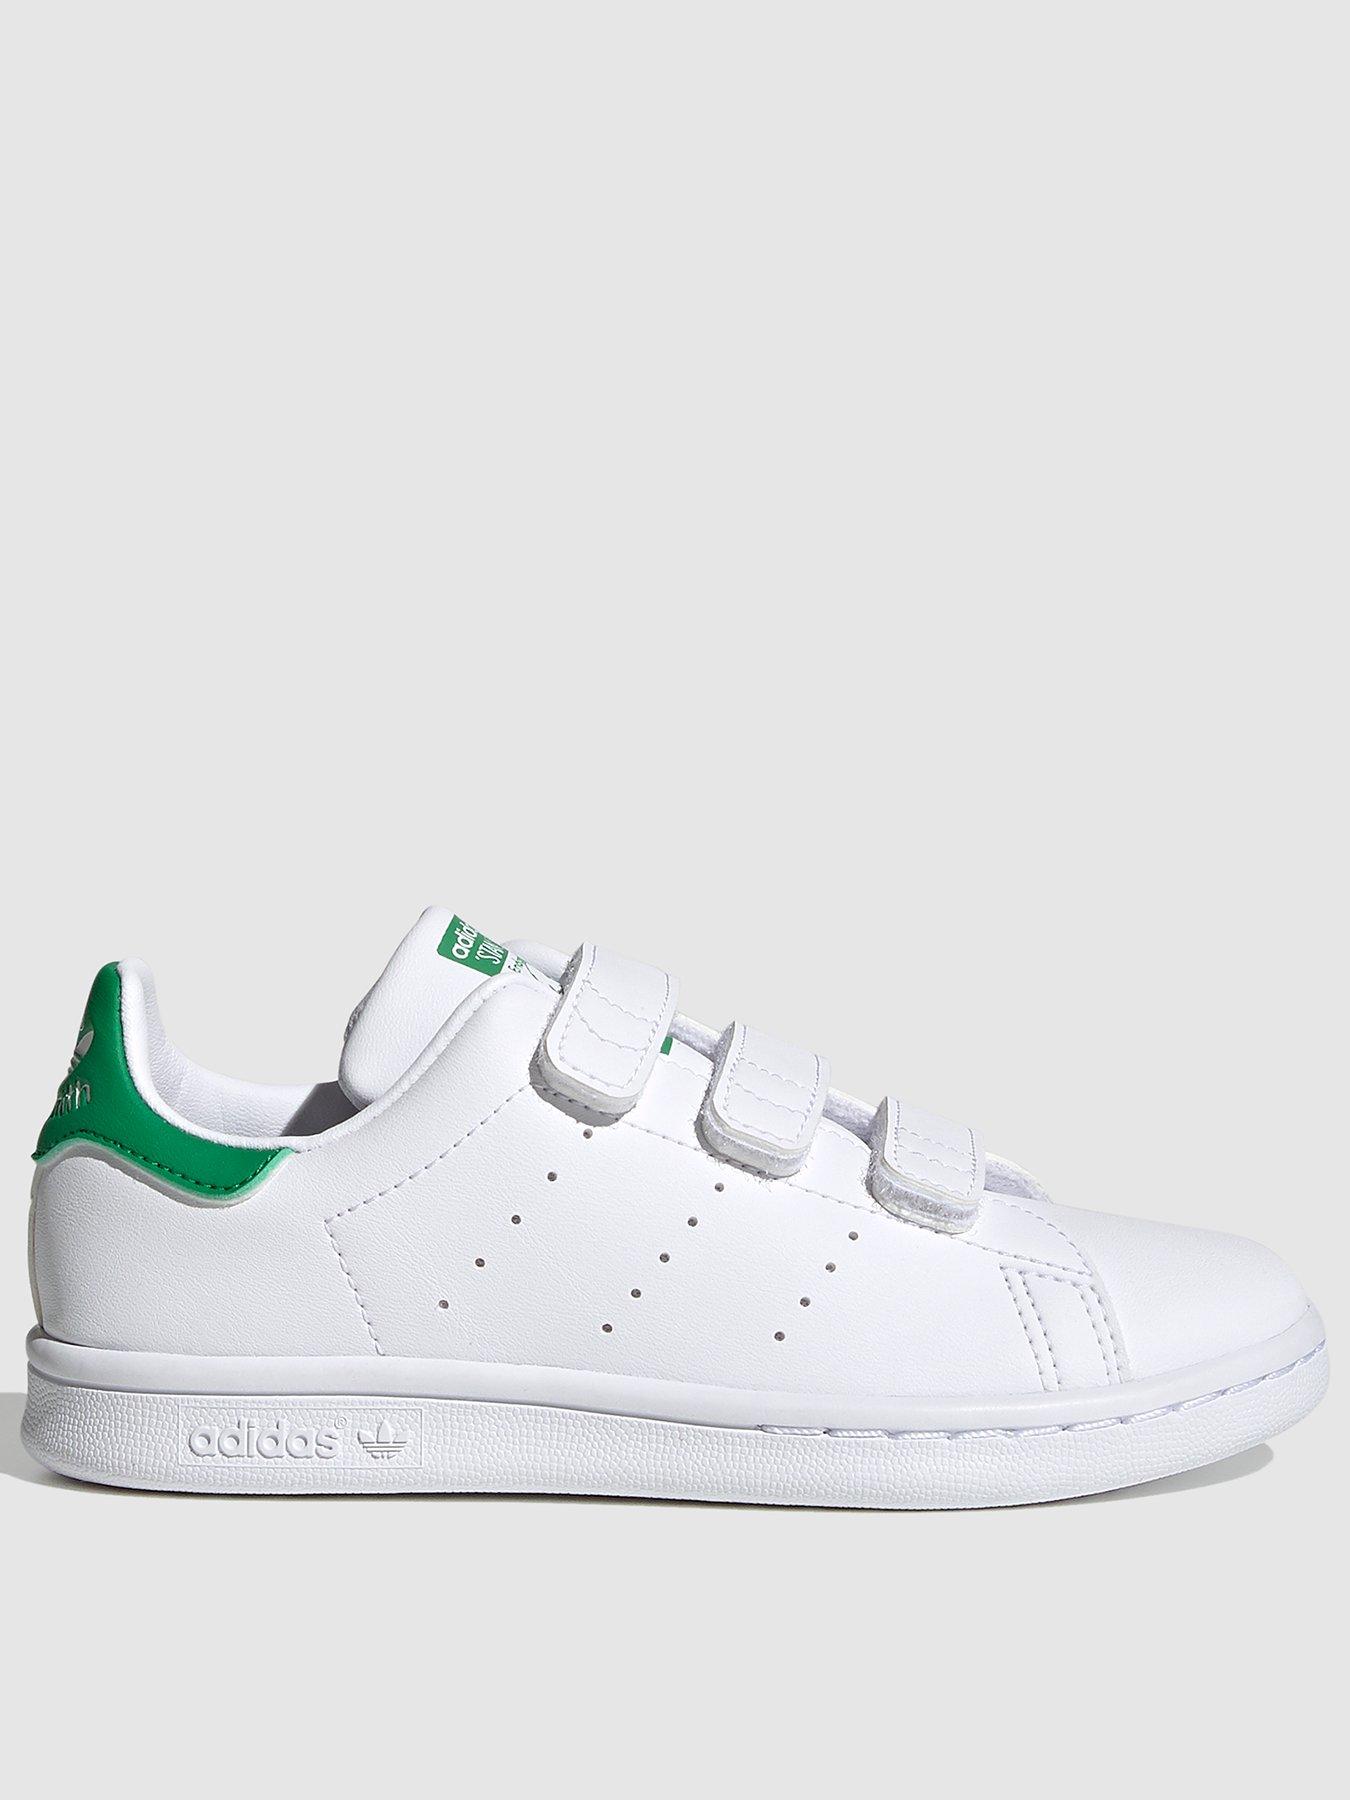 Setting Free the Bears  Stan smith outfit men, Short men fashion, Adidas  stan smith outfit